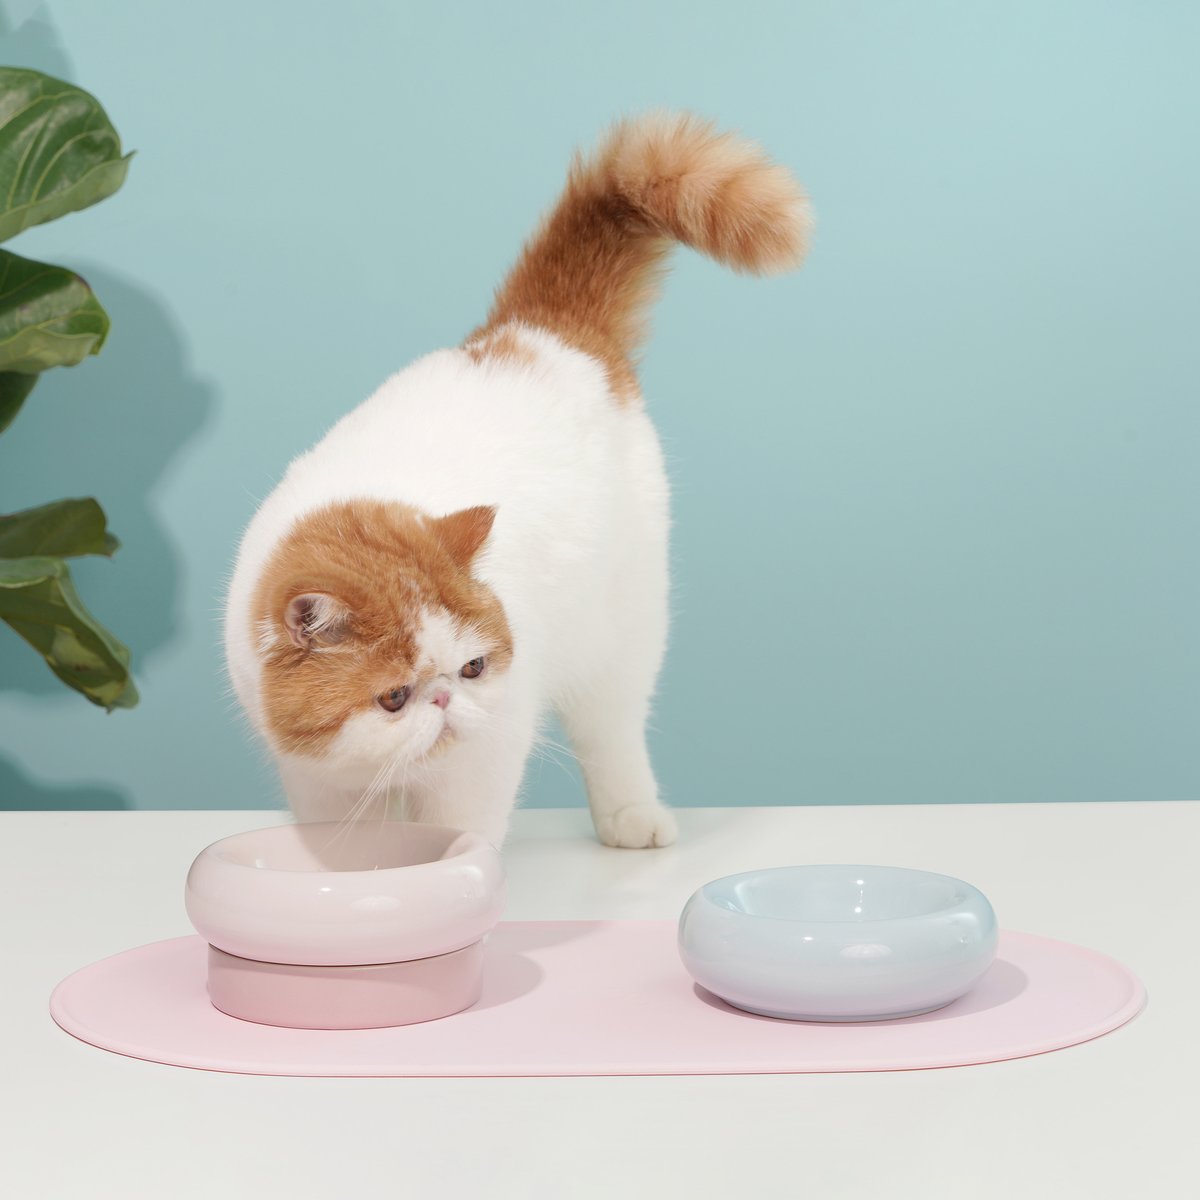 This modern 2 in 1 stackable food bowl is perfect for cats and puppies. Both bowls can be used separately or can be stacked to create a higher dining experience.  Made from durable porcelain material, this safe and pet-friendly bowl has anti-bacterial and heat resistant properties. When stacked the bowls help improve digestion and relieve neck stress. They can also be used separately for multi-pet households.